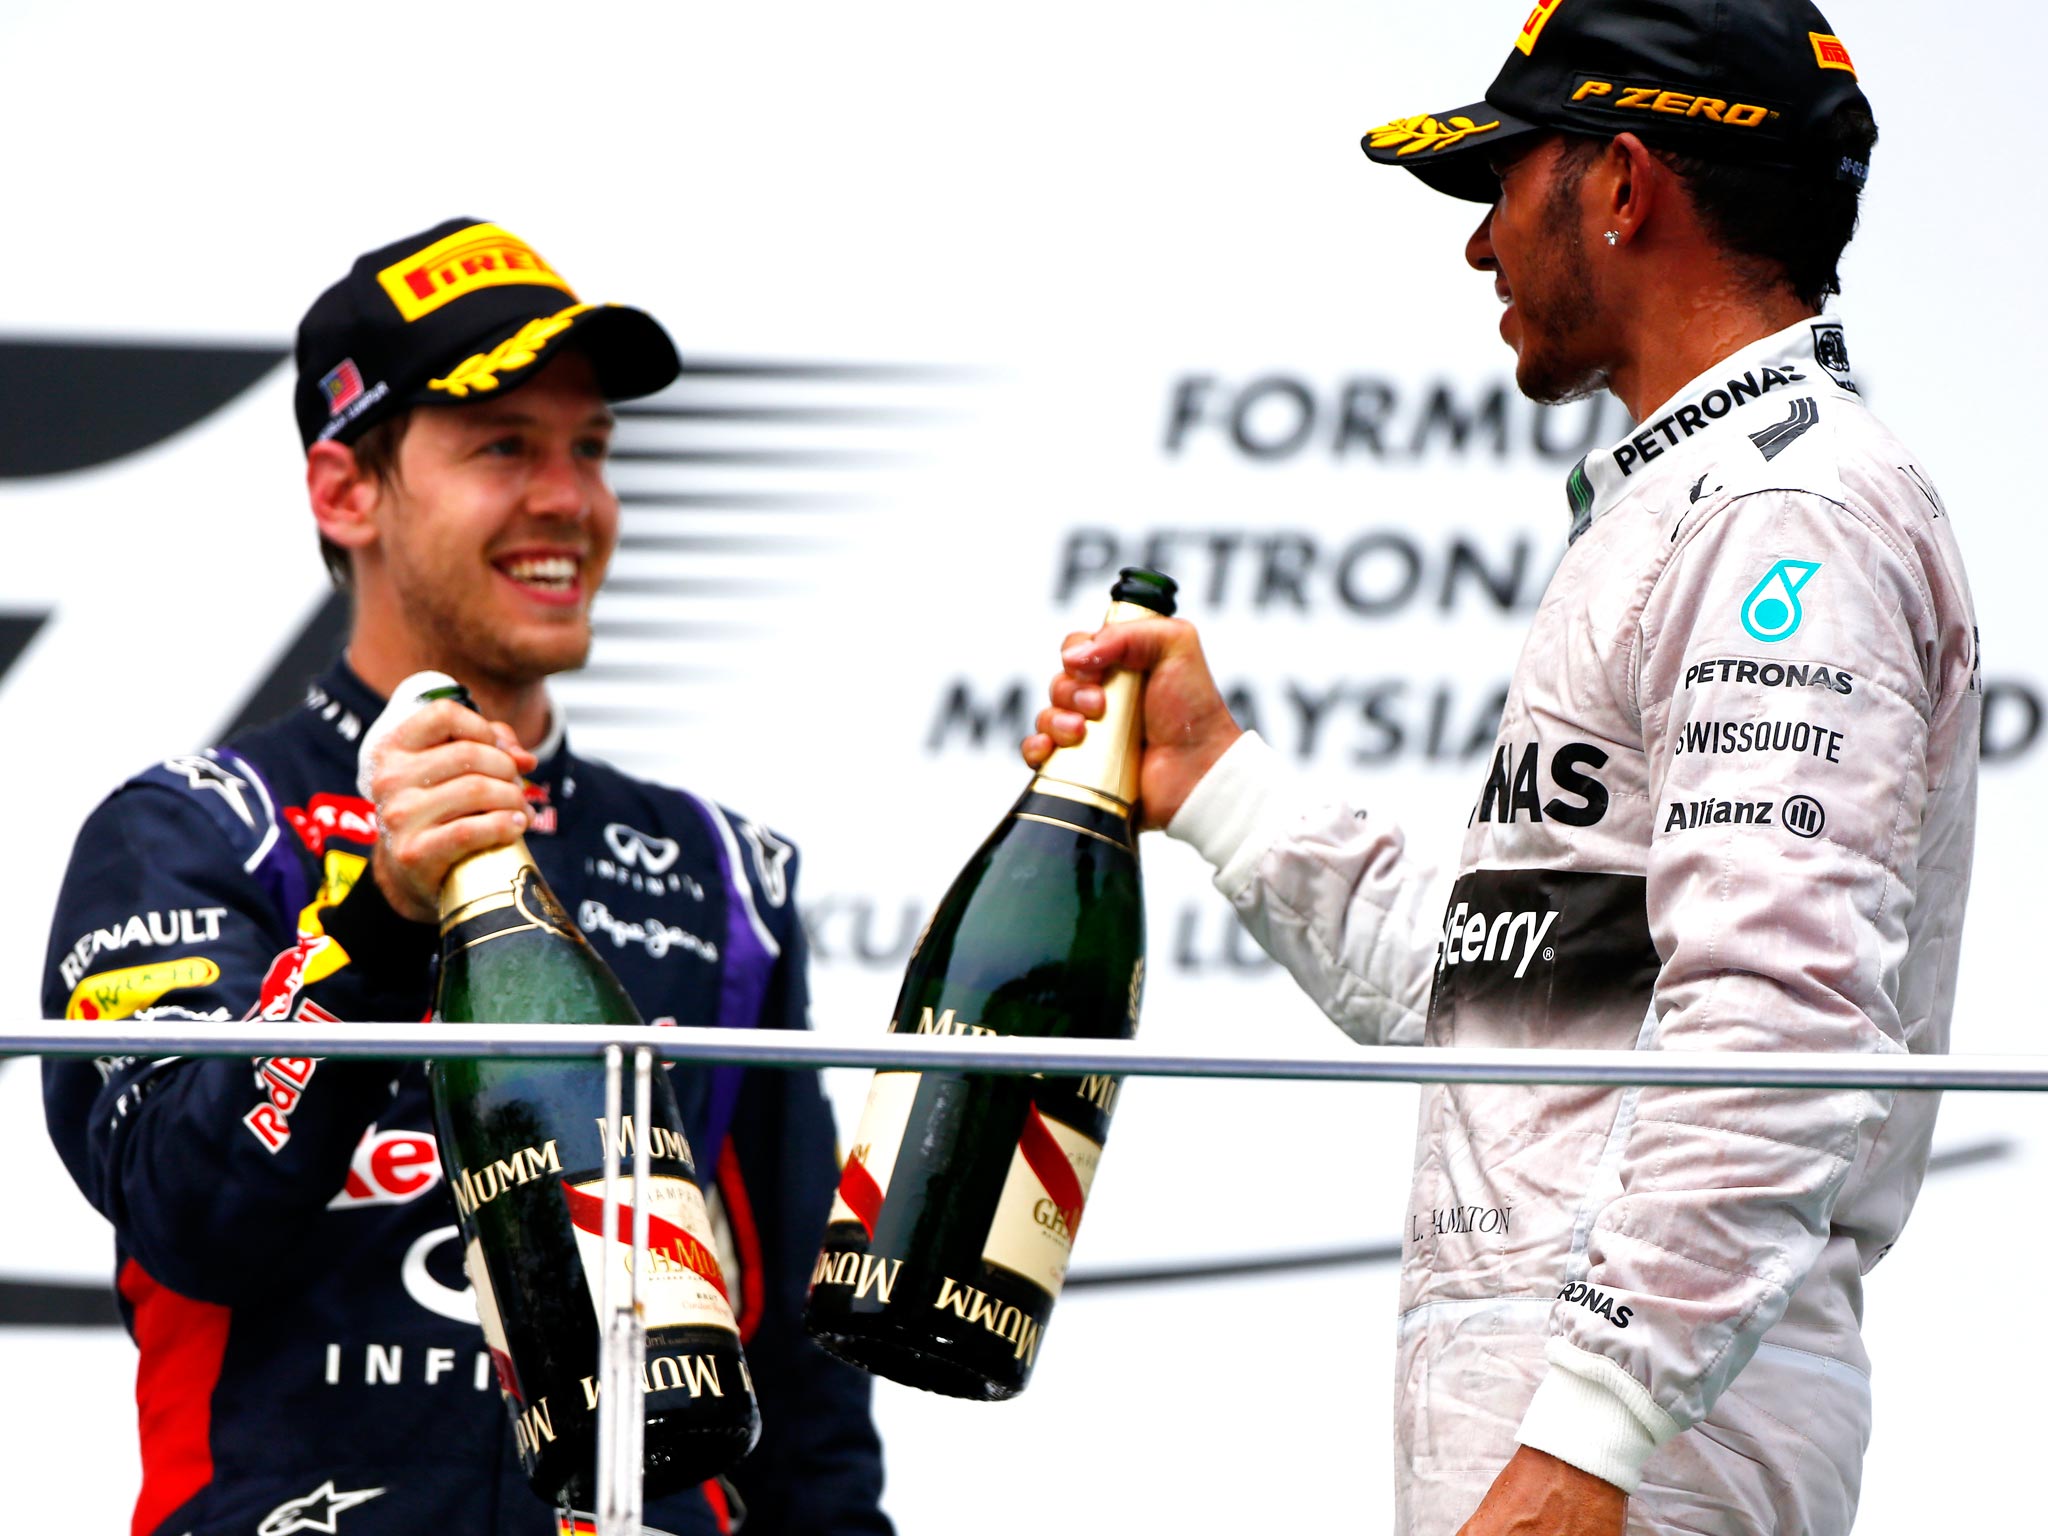 Sebastian Vettel has warned Mercedes that Red Bull are on the up and will be challenging them for race wins soon enough